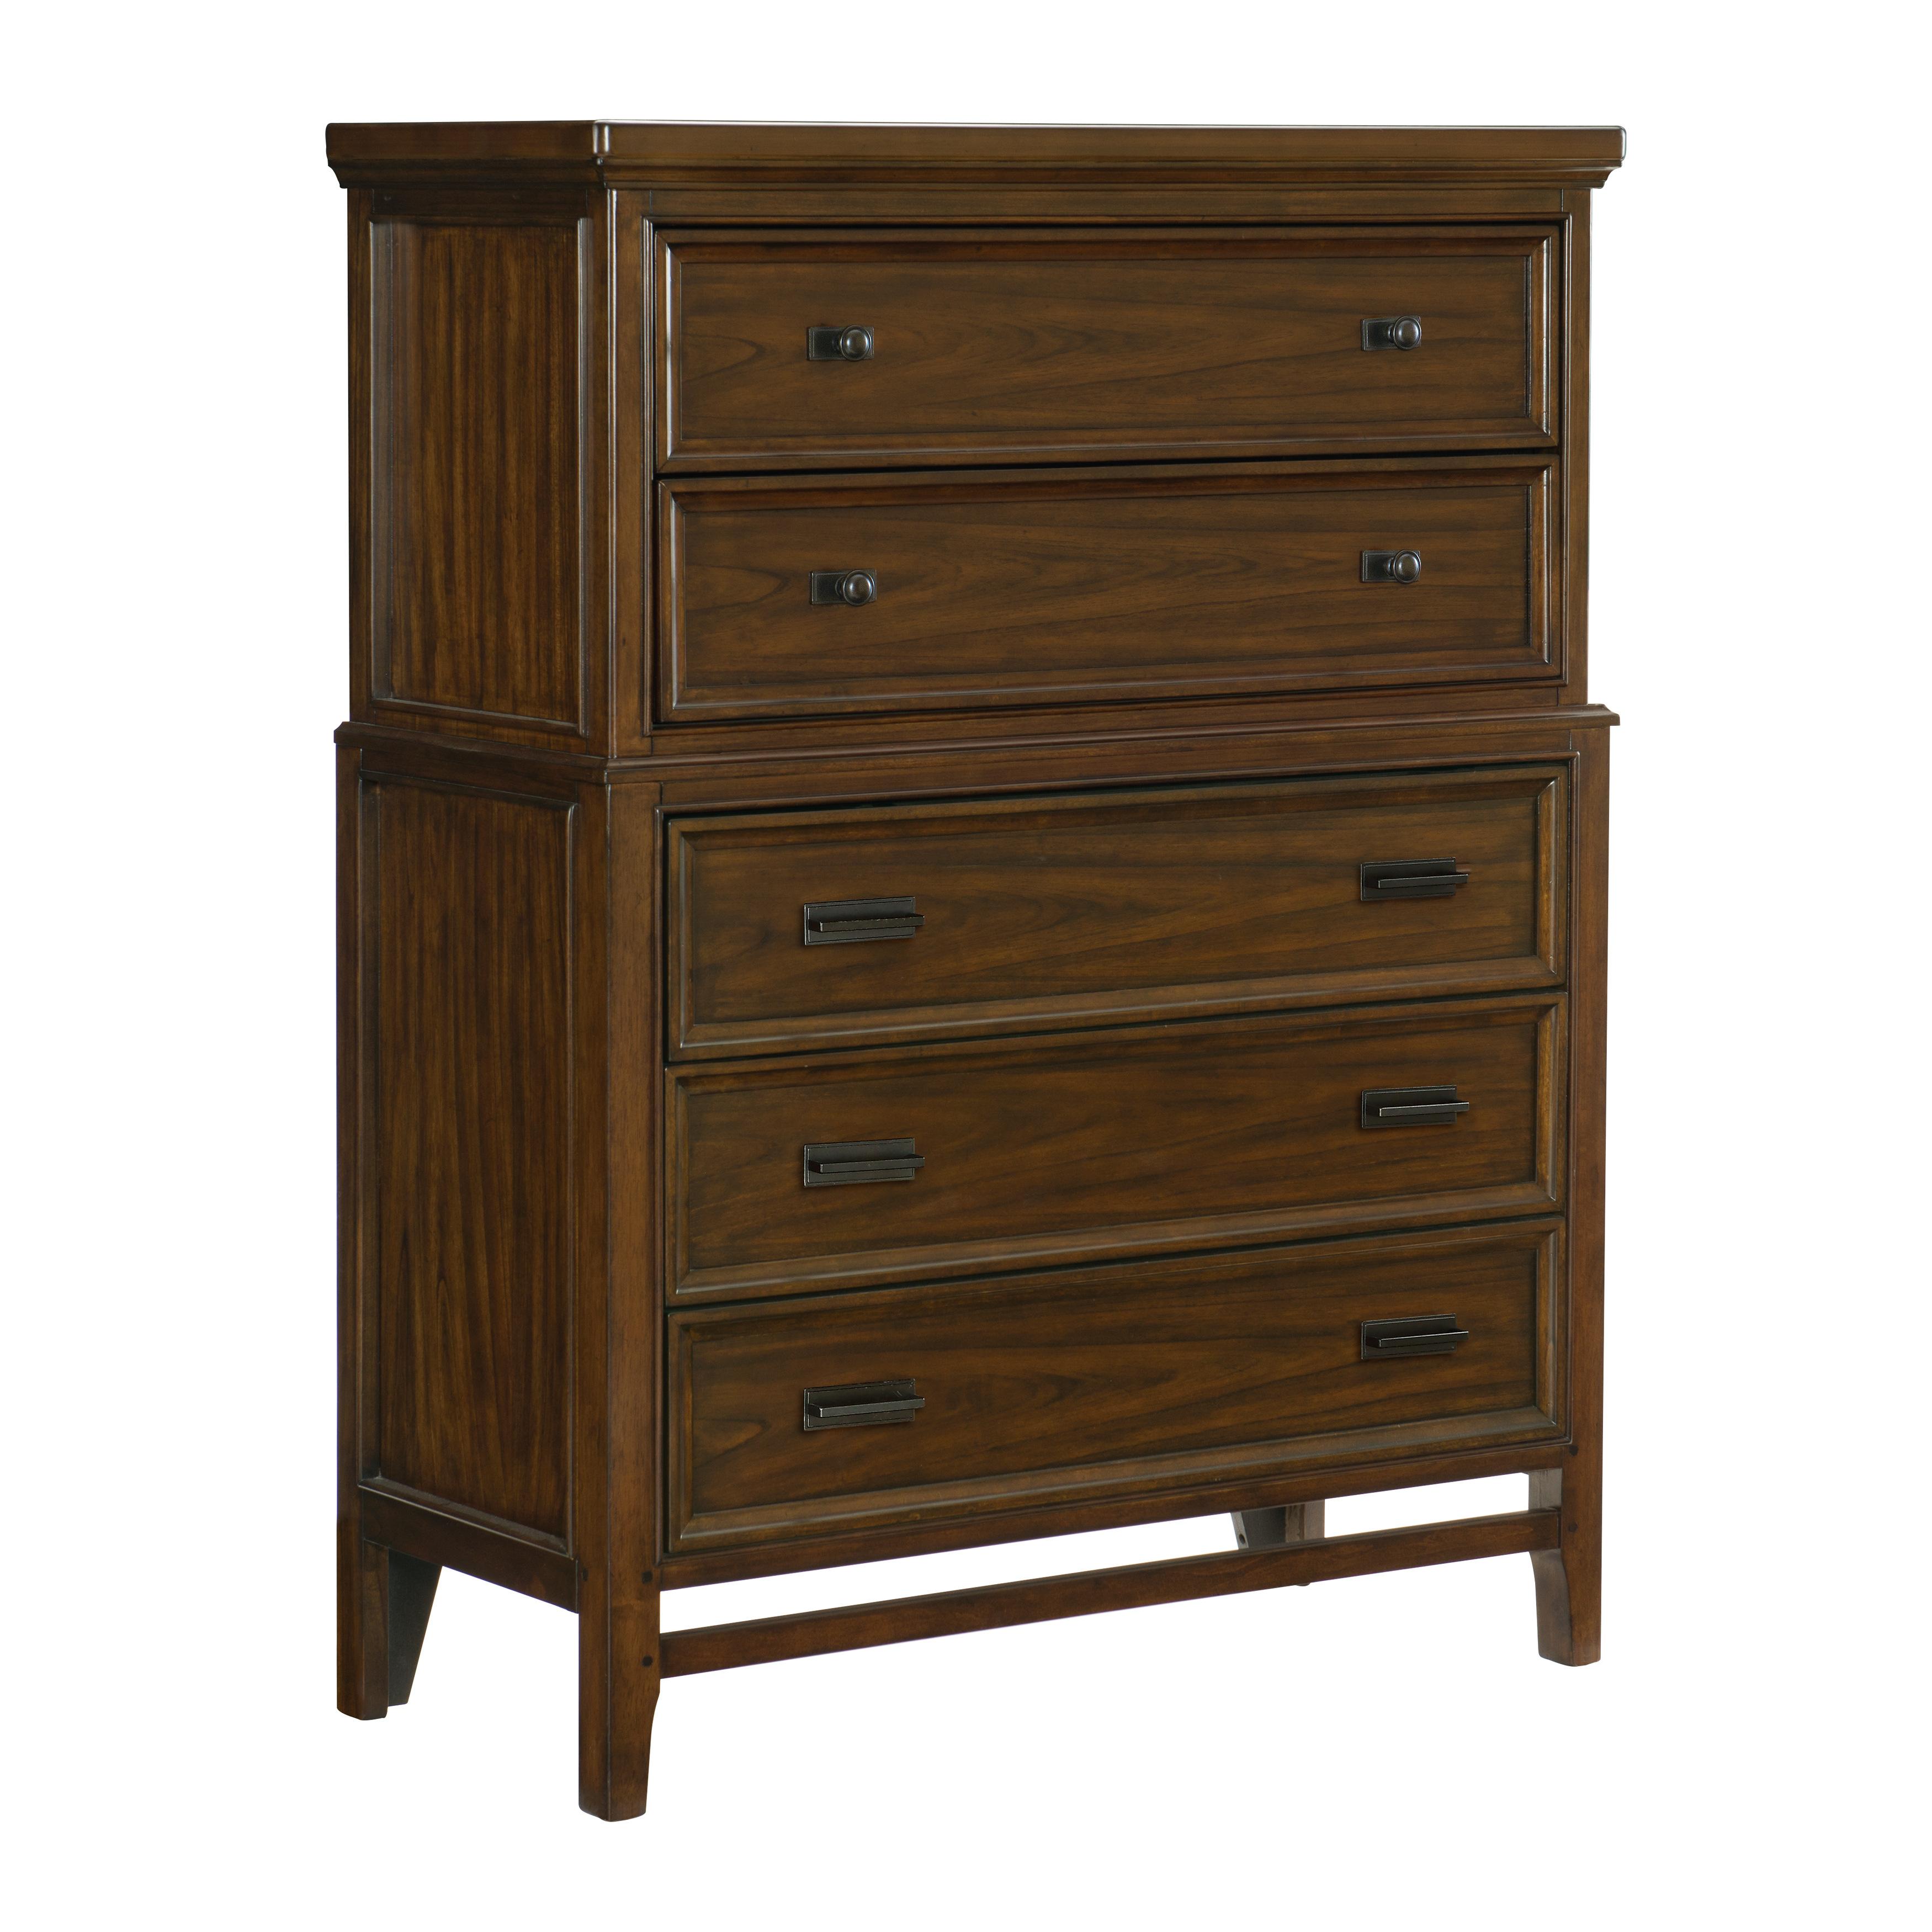 

    
Classic Brown Cherry Wood Chest Homelegance 1649-9 Frazier Park
